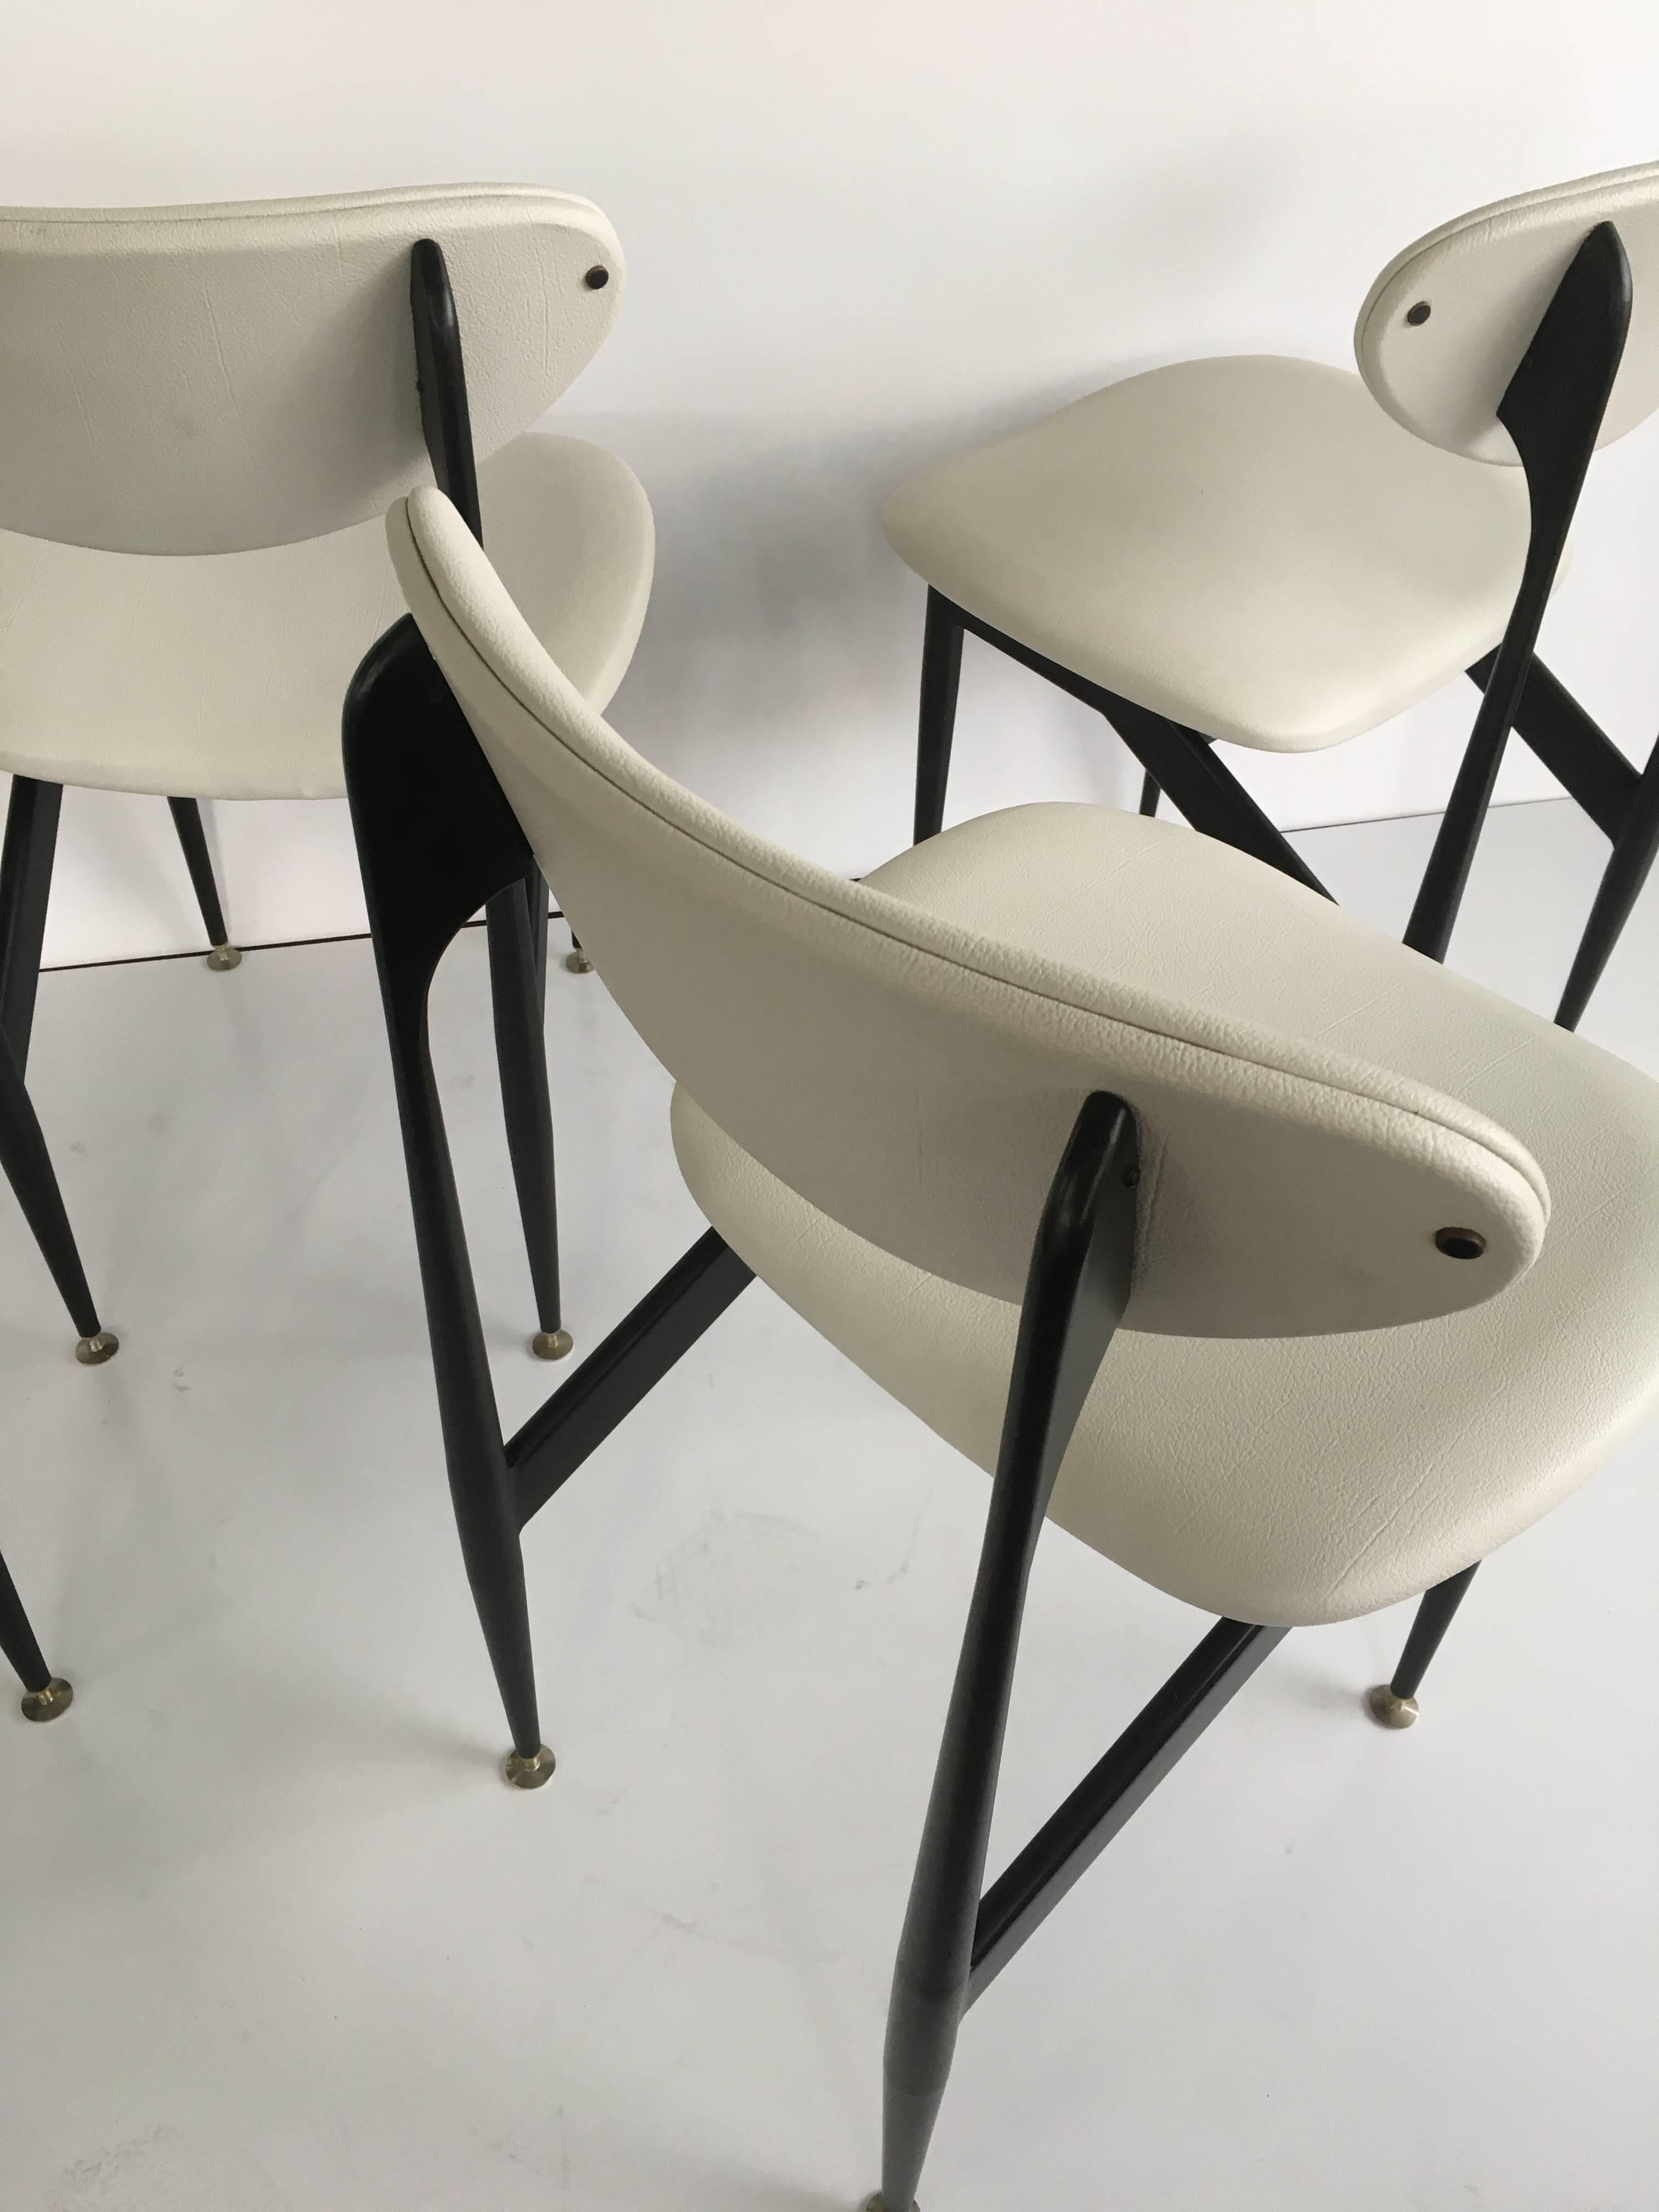 Set of six 'Scape' dining chairs, designed by renowned Australian furniture designer Grant Featherston. 

Manufactured by Aristoc Industries Melbourne.

Fully restored with newly coated frames and upholstered in high quality black Italian